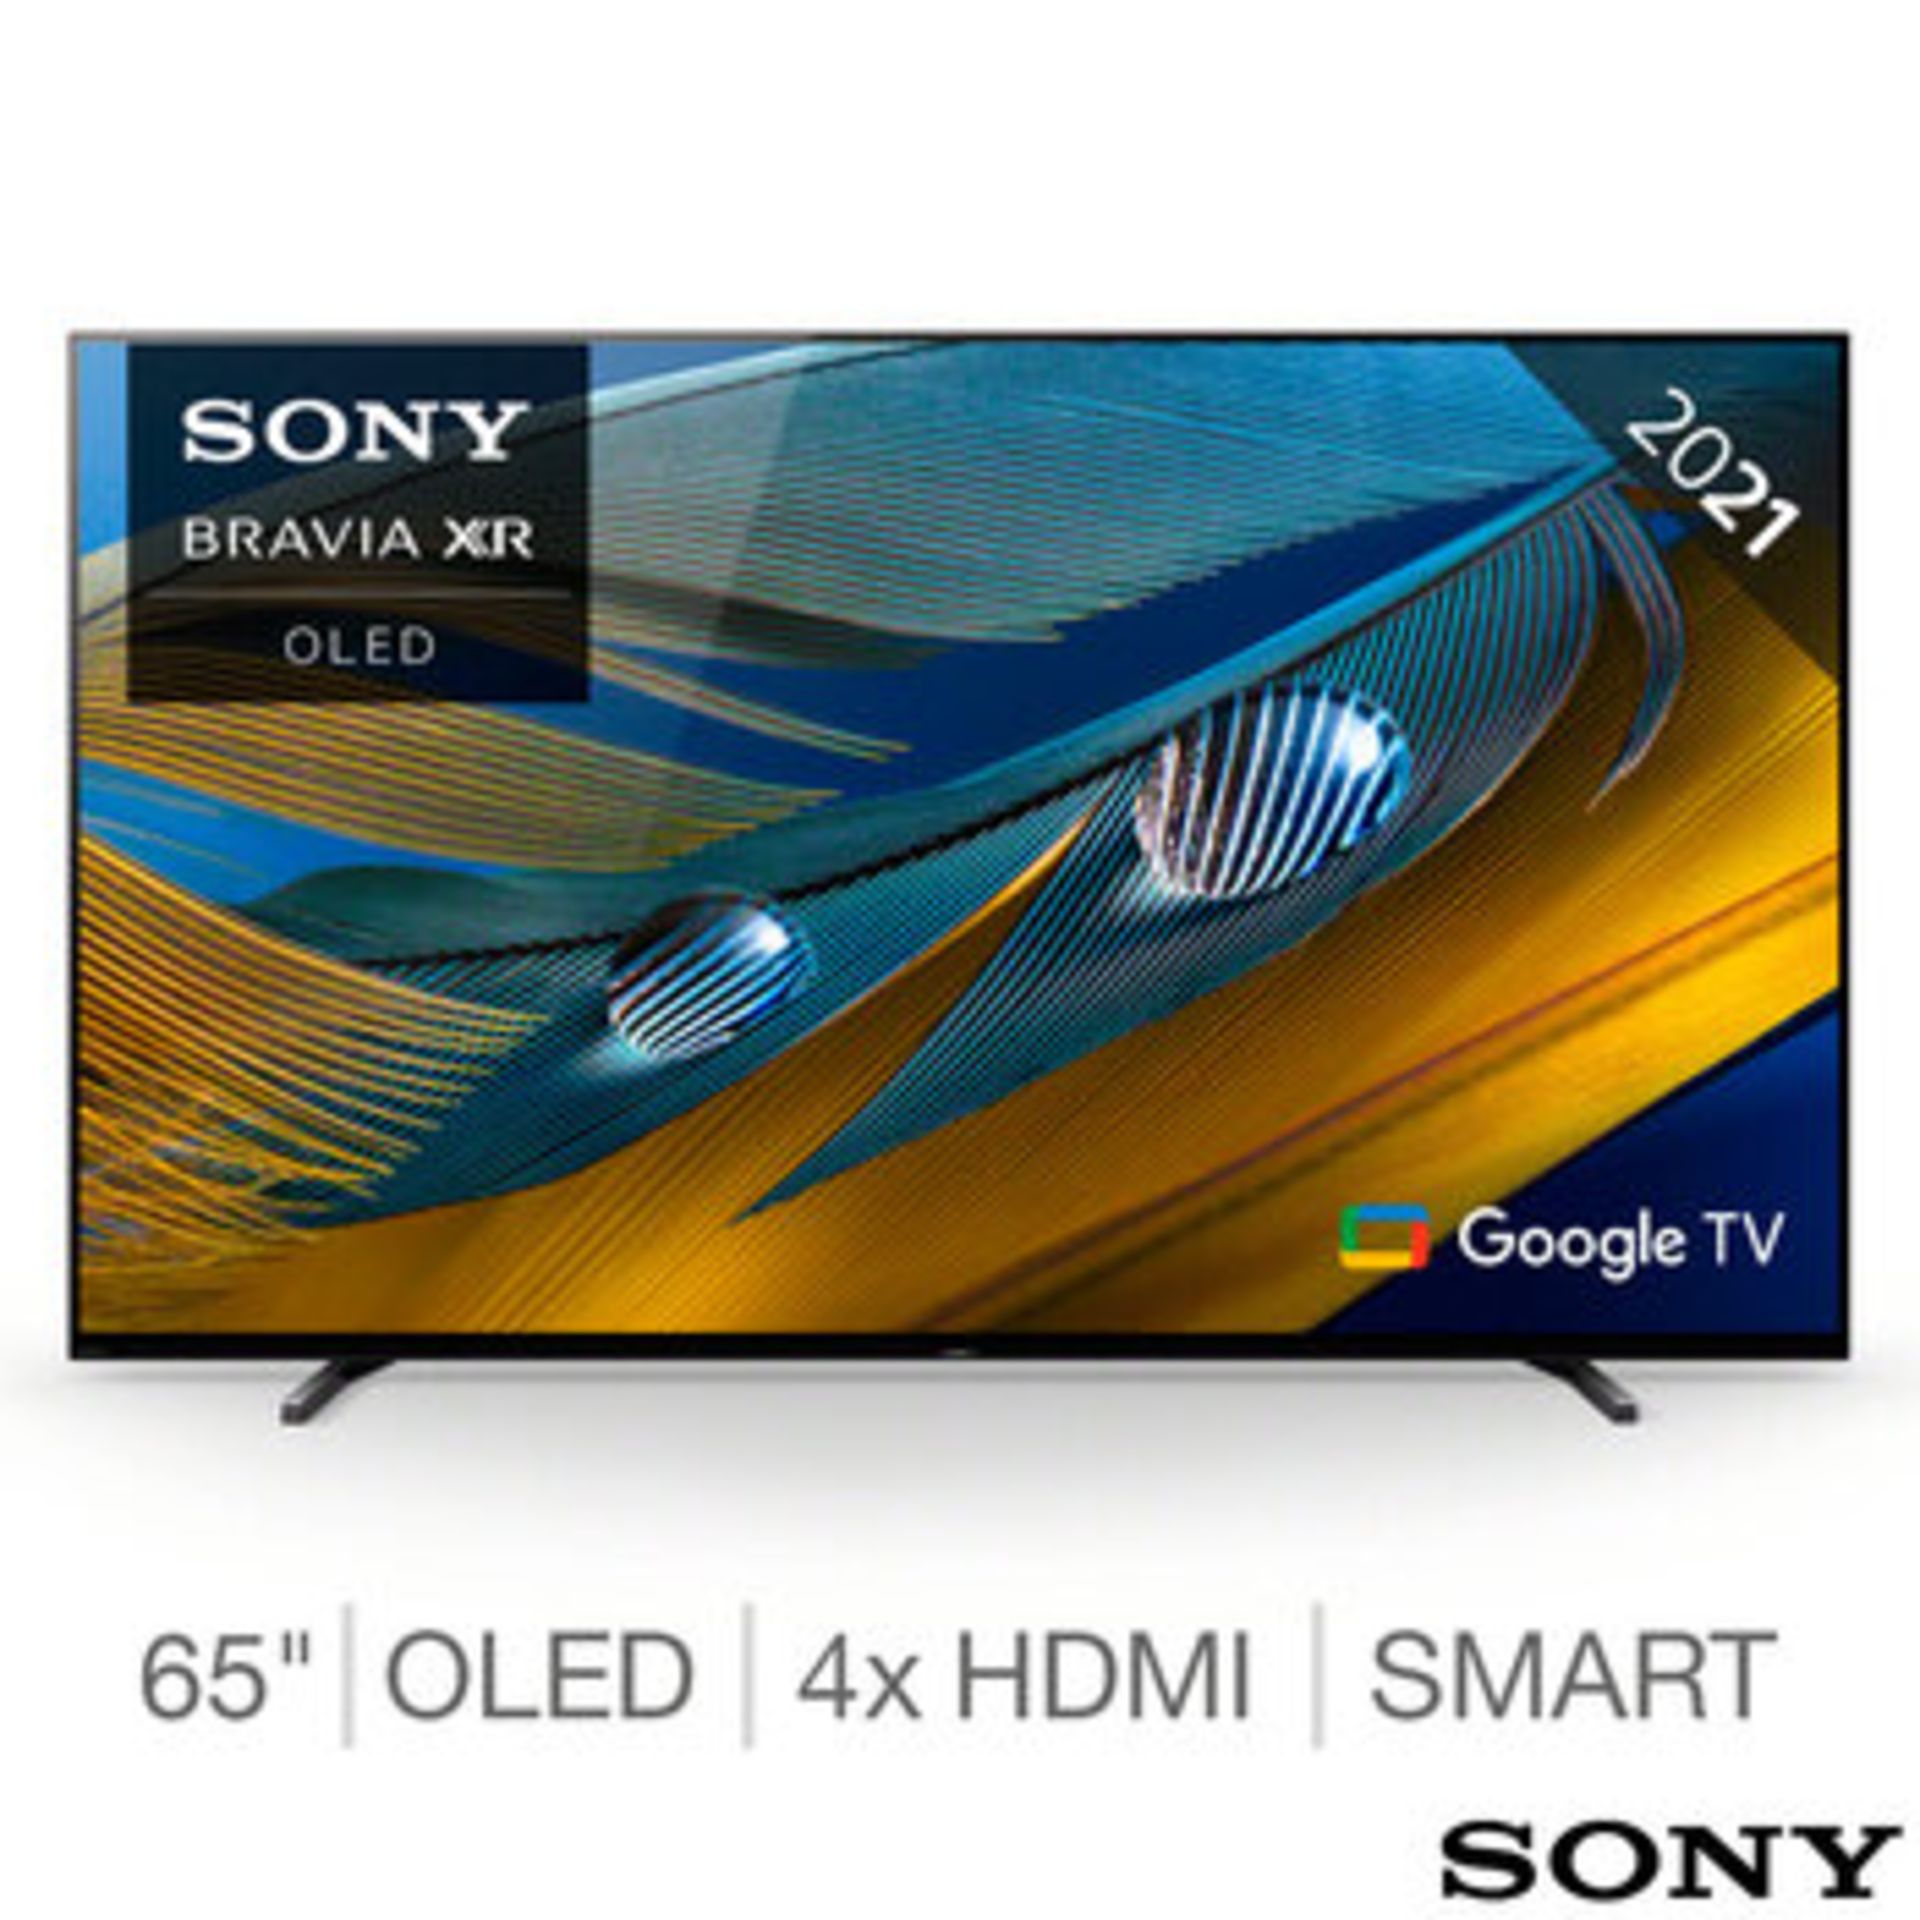 1 BOXED SONY OLED BRAVIA 2021 MODEL 65A80J 65" SMART 4K ULTRA HD HDR OLED TV WITH GOOGLE TV &